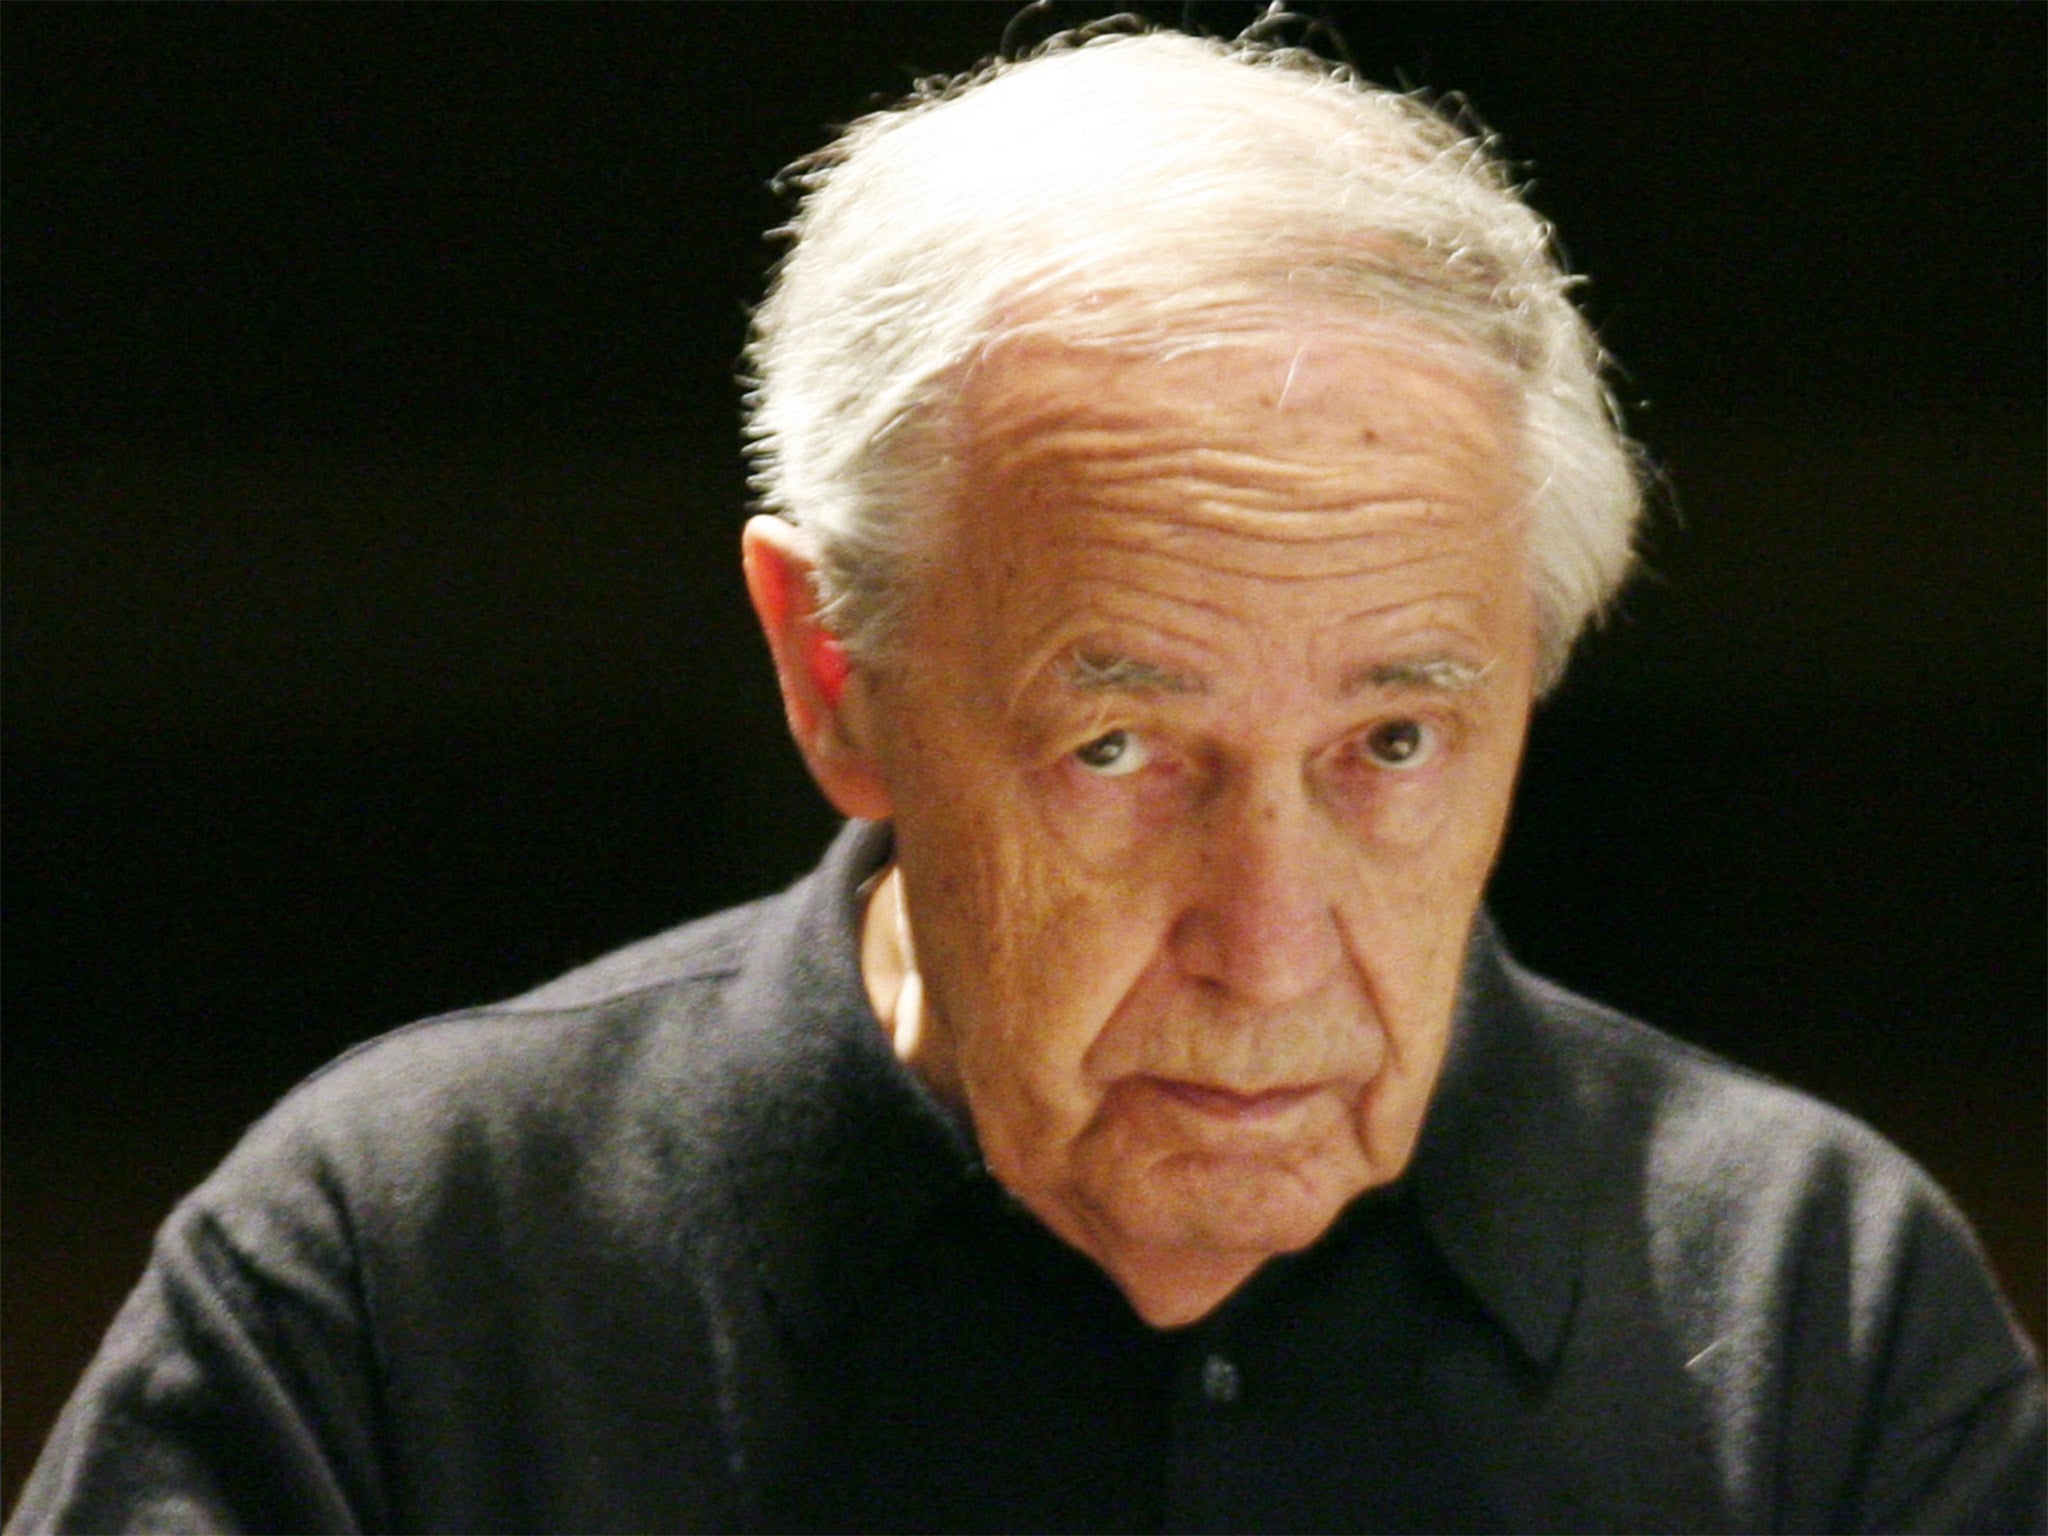 Pierre Boulez: Visionary composer and conductor who transformed 